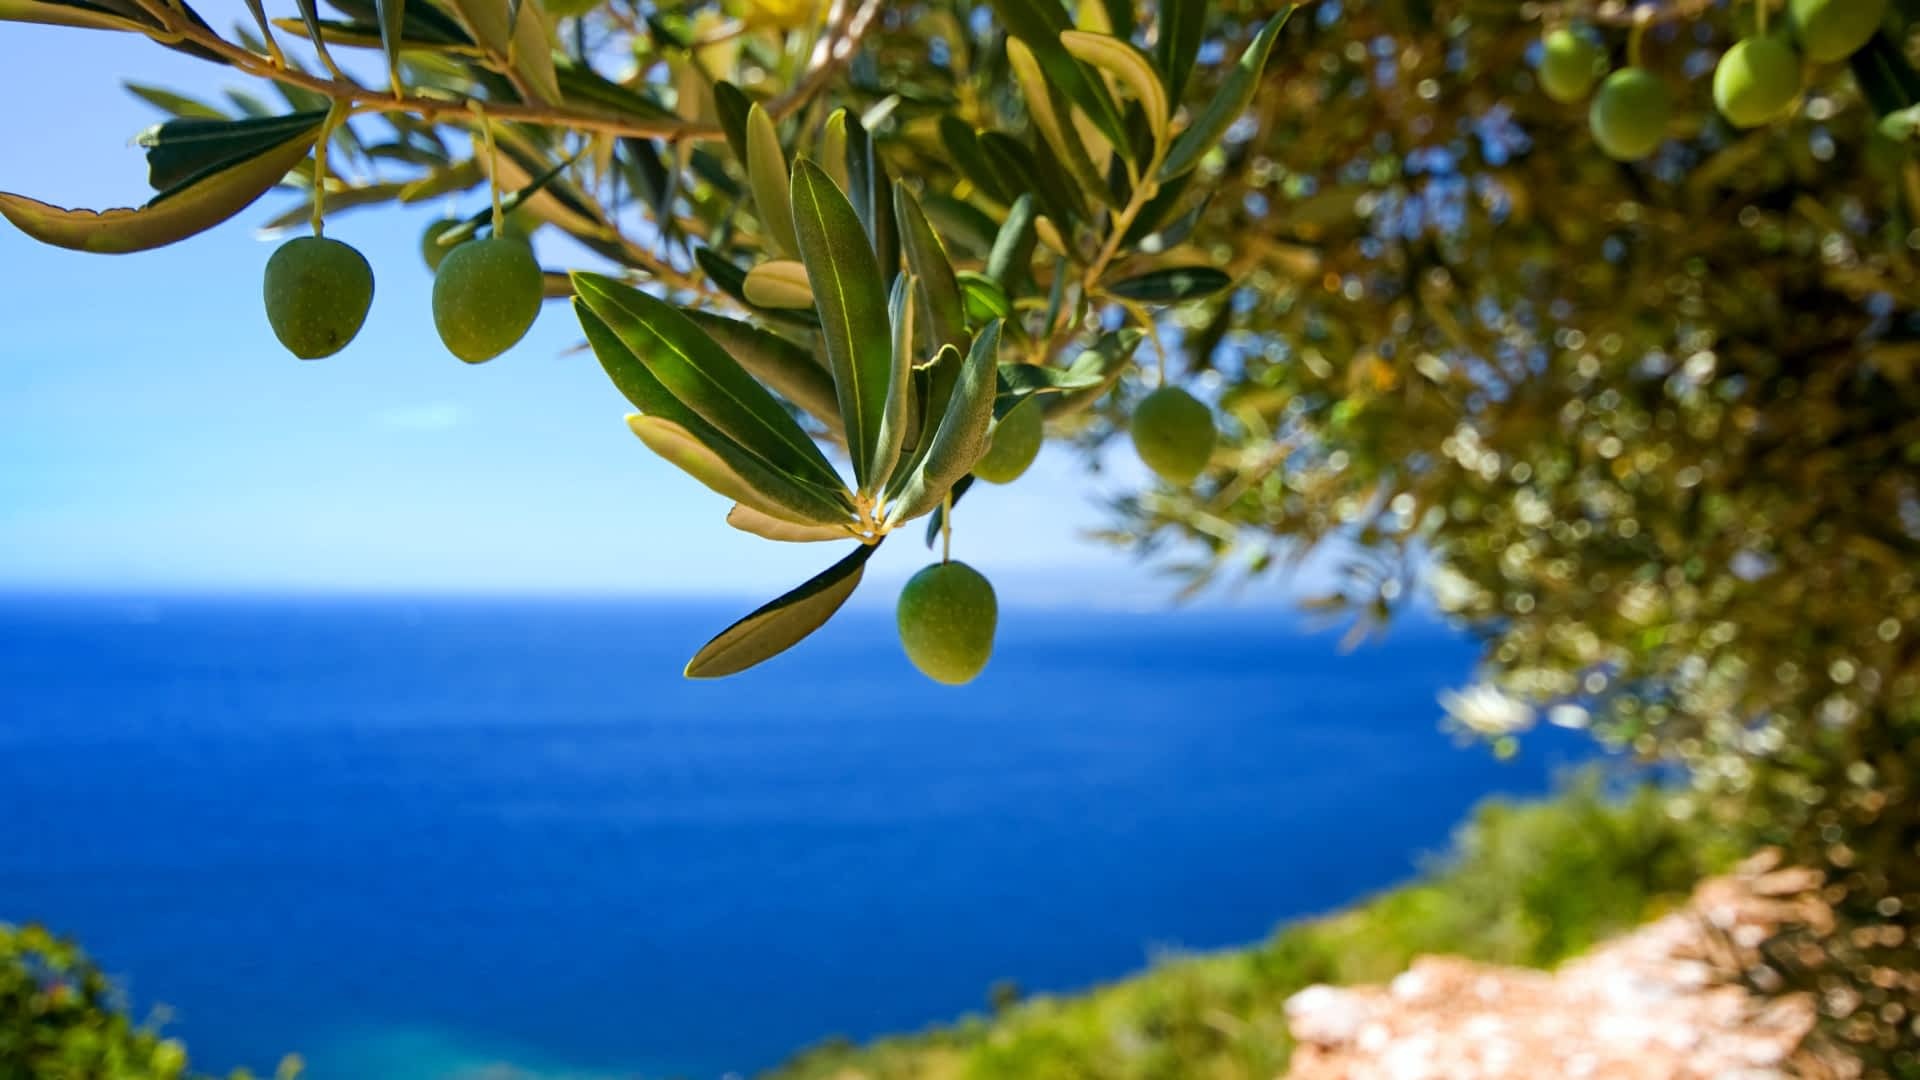 Olive: The average life of a tree is between 300 and 600 years. 1920x1080 Full HD Wallpaper.